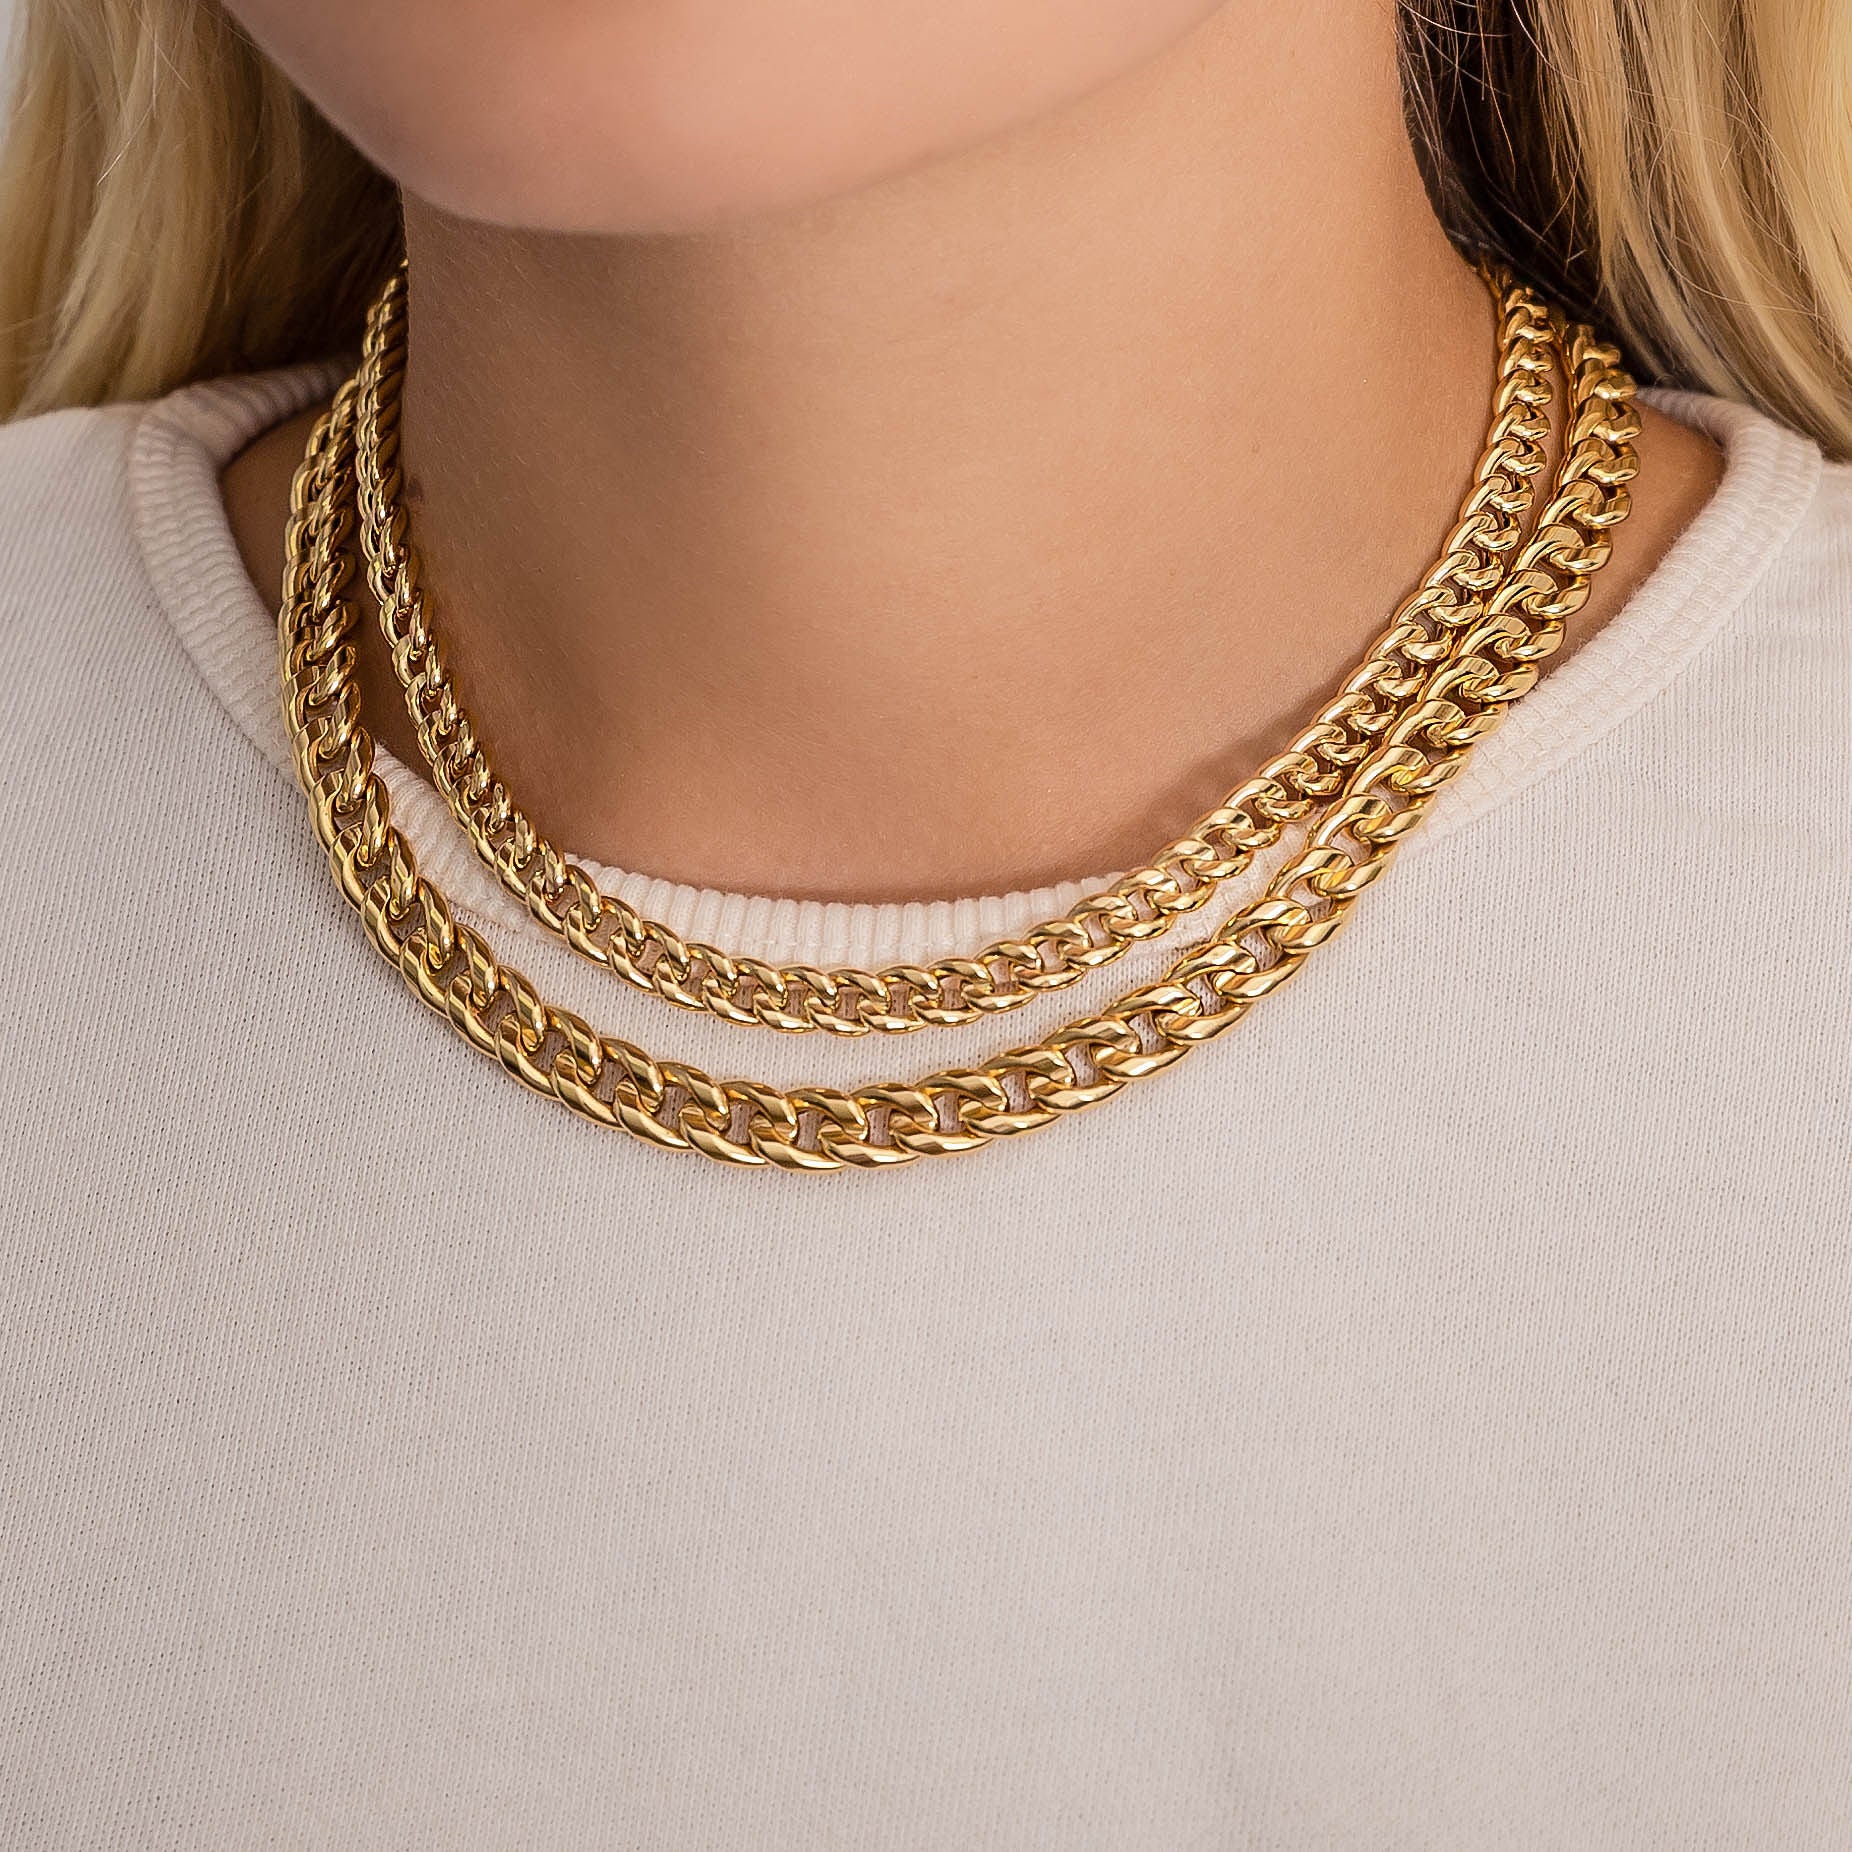 1 CT. T.W. Diamond Cuban Link Chain Necklace in Solid Sterling Silver with  14K Gold Plate - 18